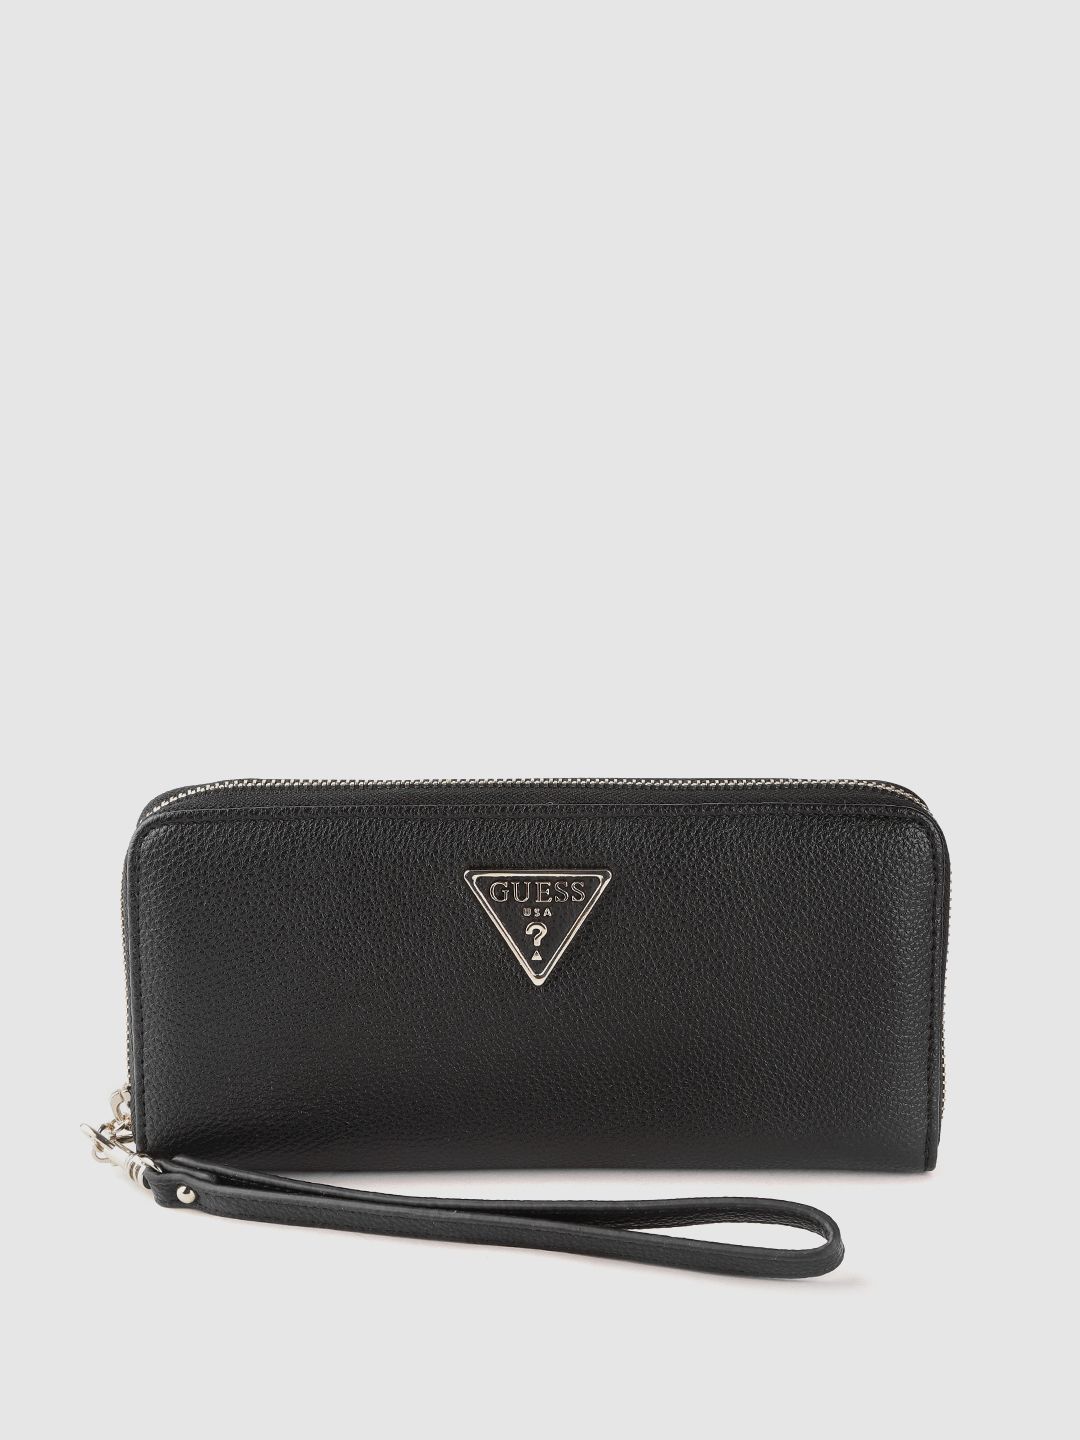 GUESS Women Black Saffiano Effect Zip Around Wallet with Wrist Loop Price in India